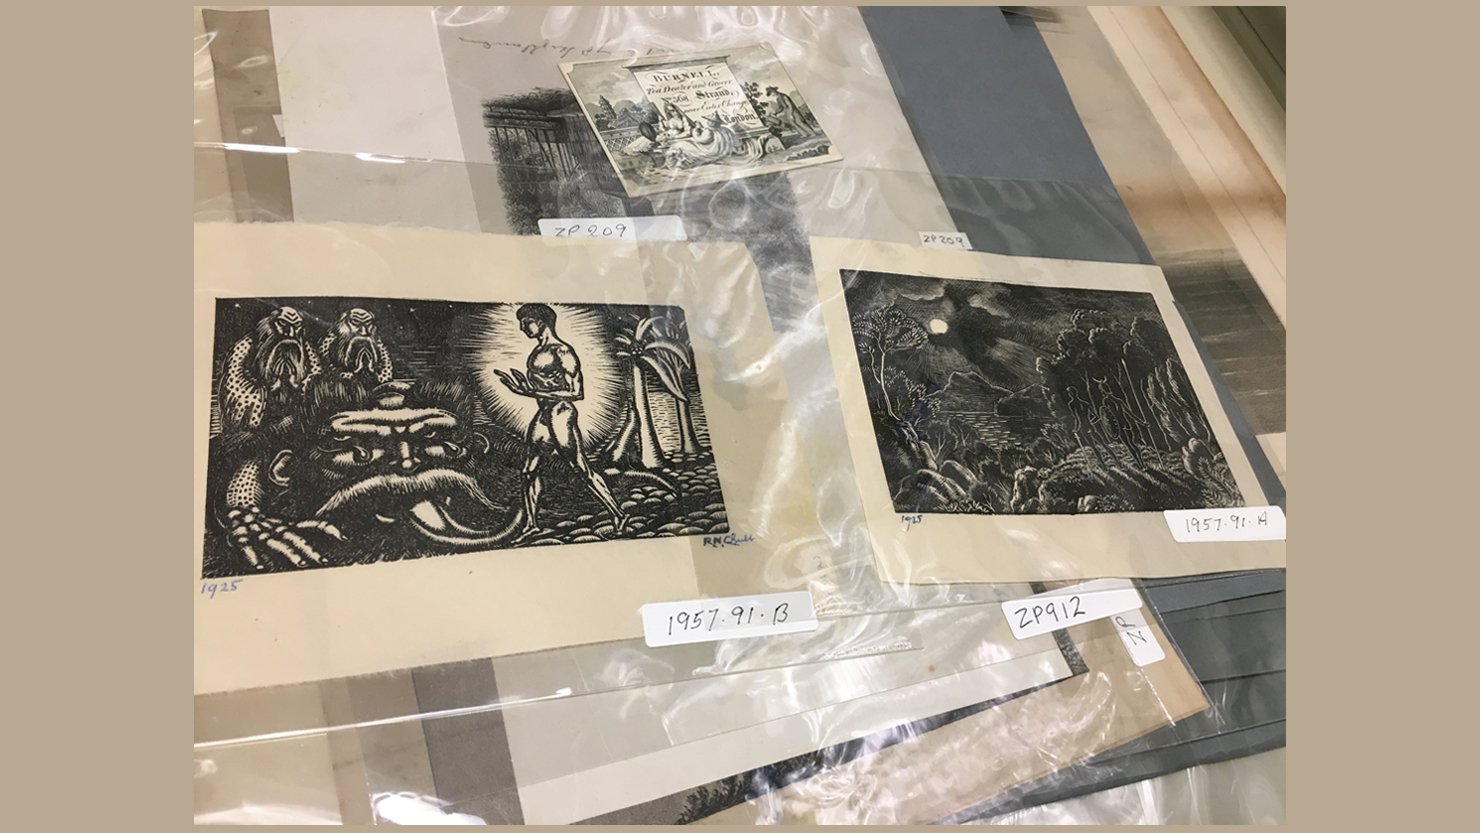 Prints from The Box's collection of works on paper